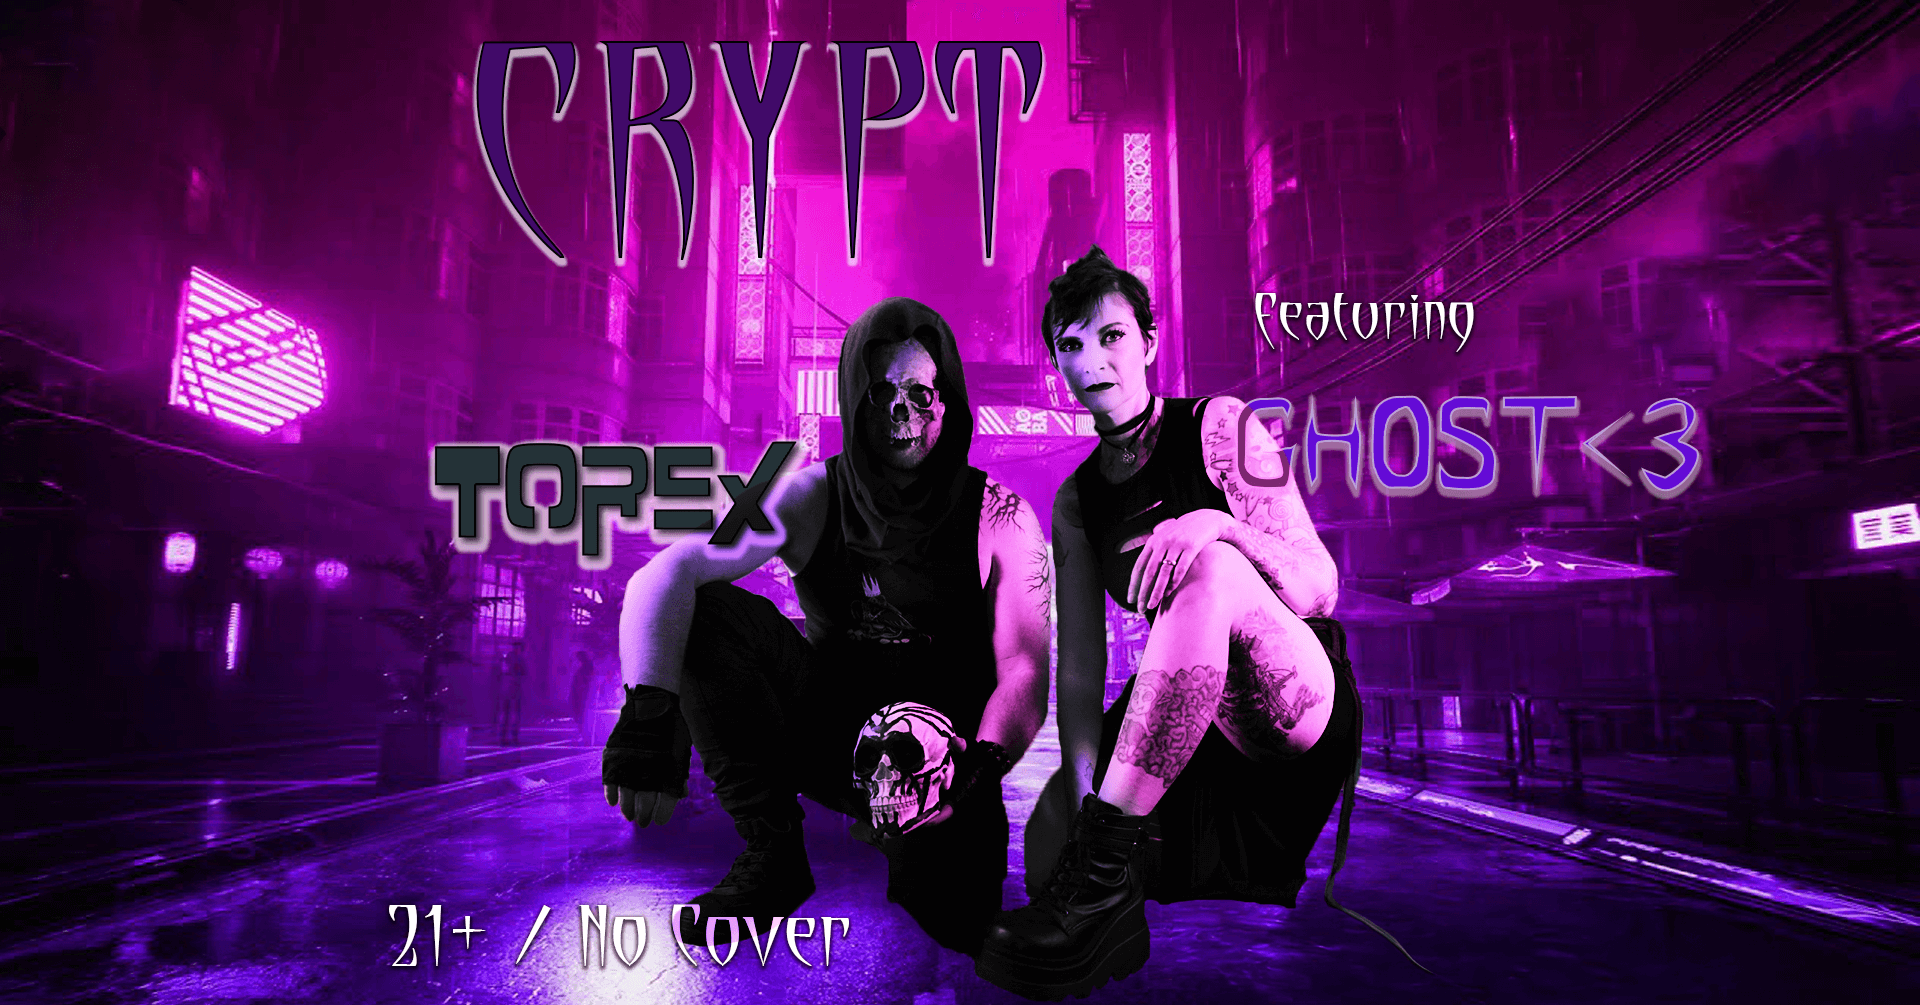 Crypt Industrial/Goth DJ poster